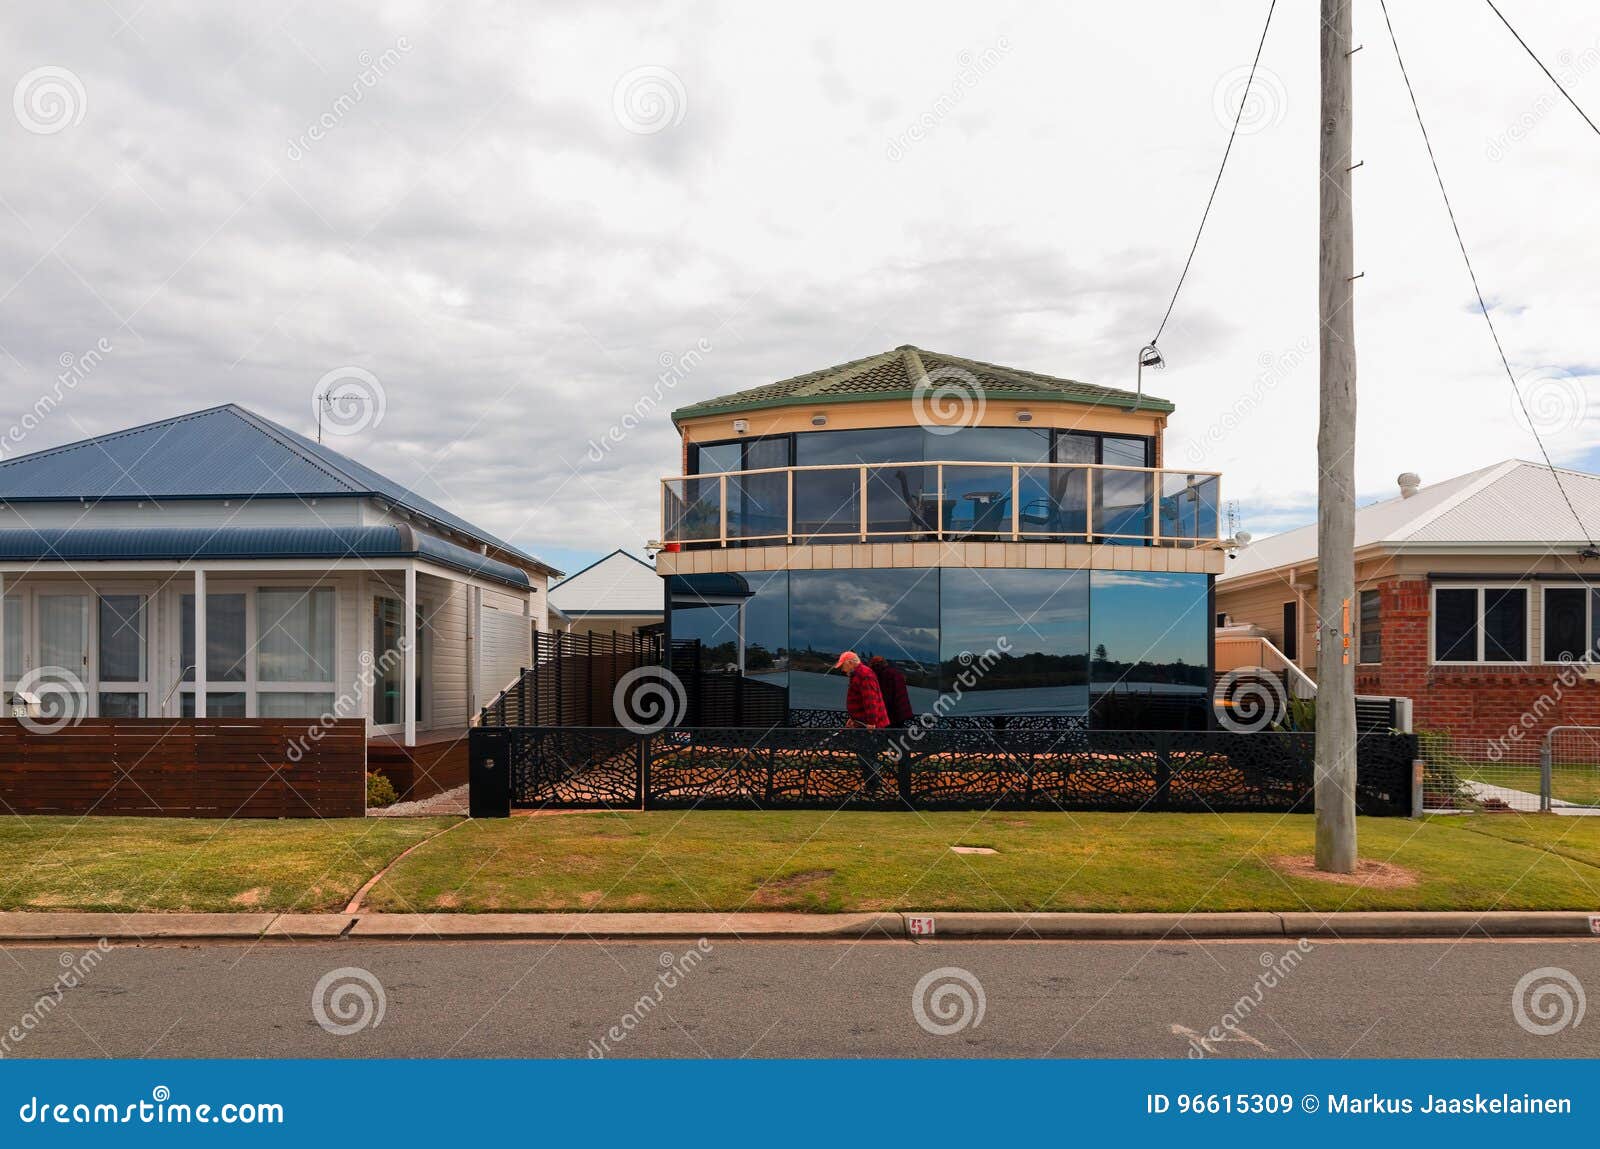 Swansea Australia Town Street Houses and Apartment Building Editorial Stock Image - Image of grass, 96615309